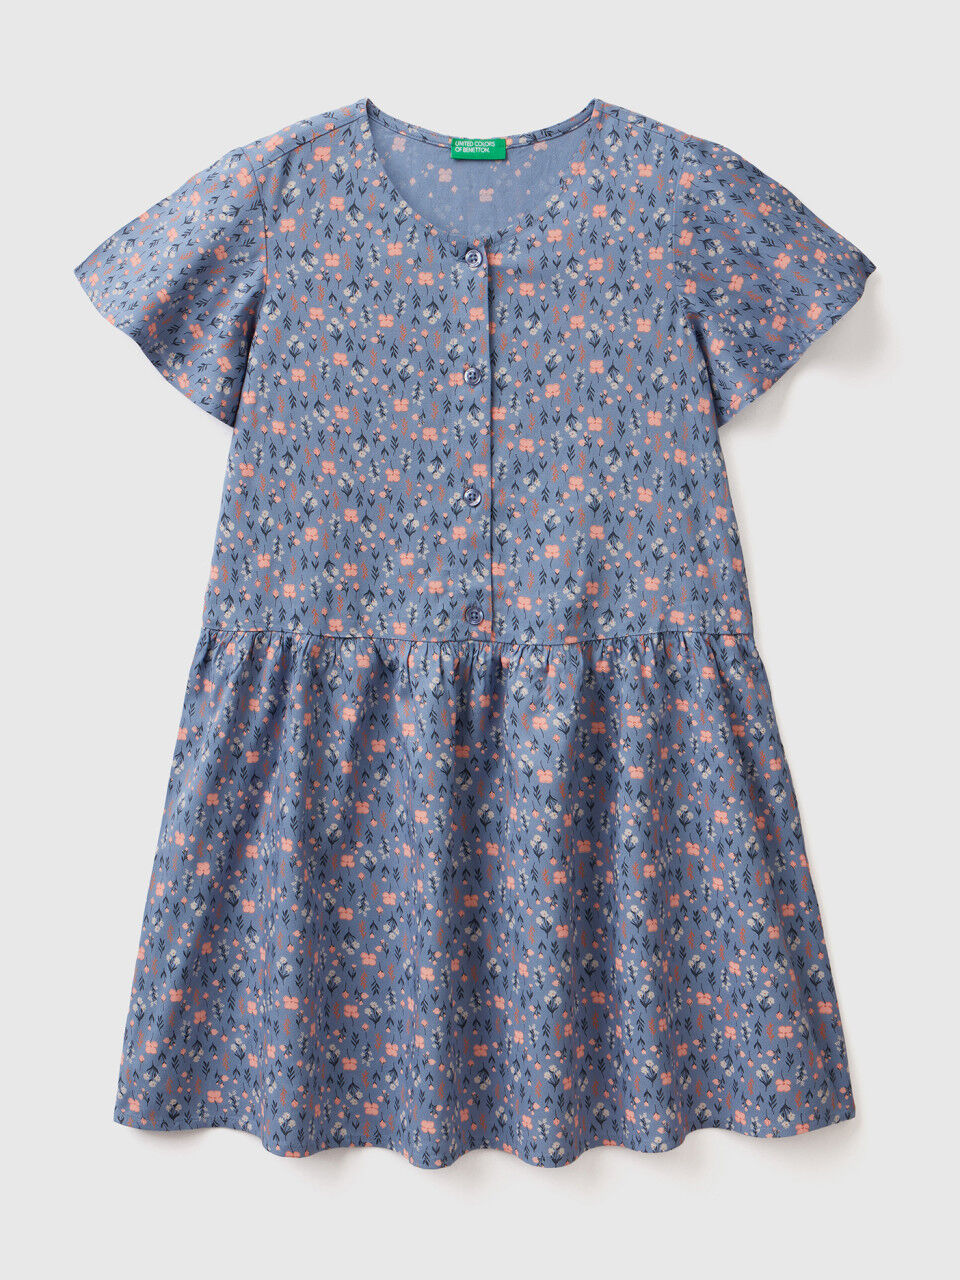 Floral dress in sustainable viscose